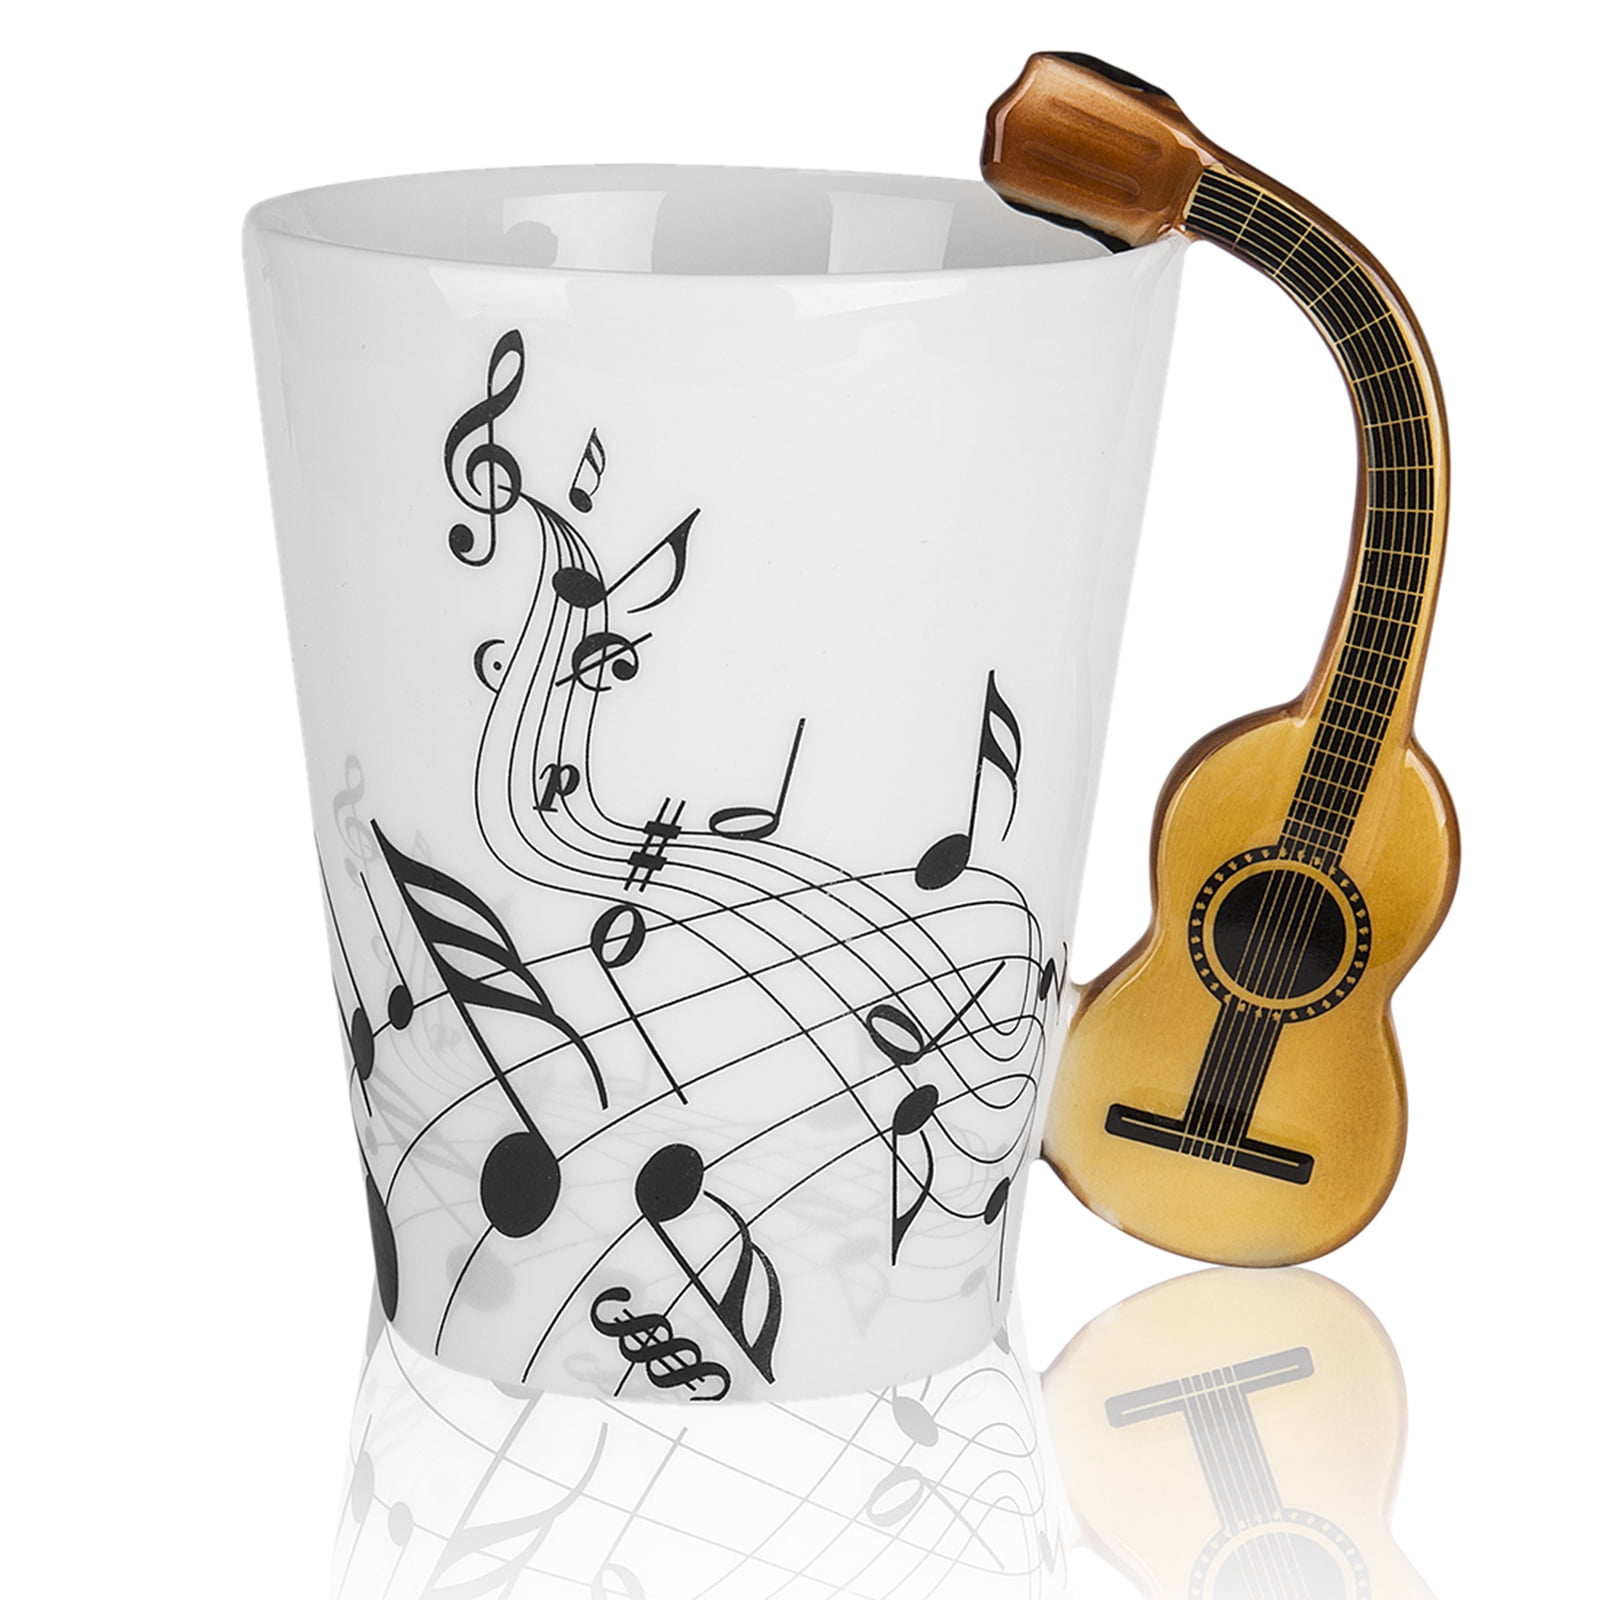 ZZZZS Layne Music Staley Singer Mug Coffee Tea Cup Mugs For Birthday Gift  Home Kitchen Office 12Oz